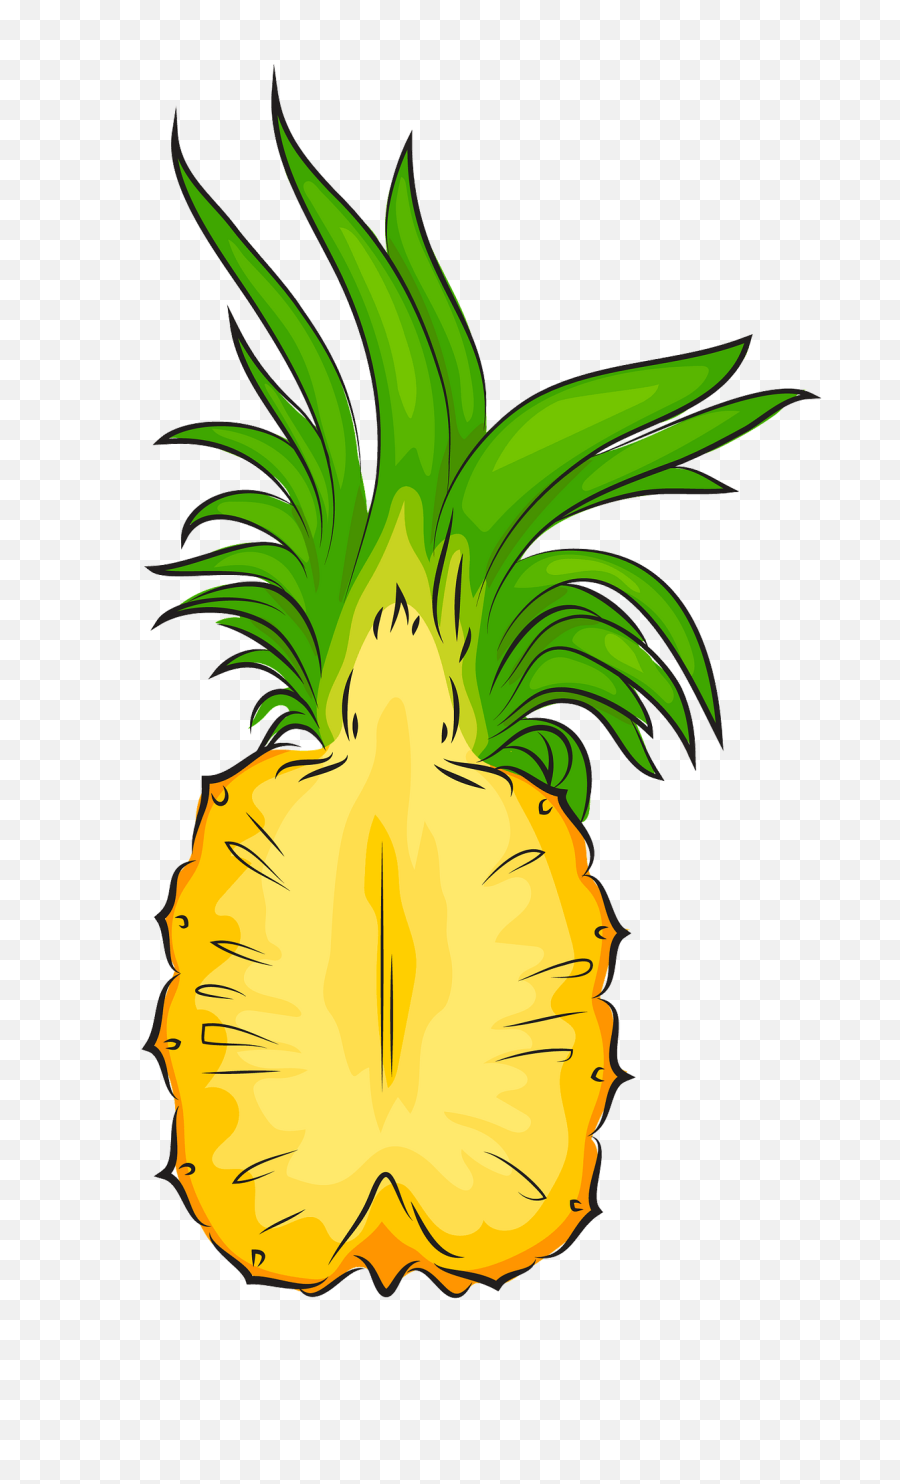 Pineapple Cut In Half Clipart Free Download Creazilla - Pineapple Cut In Half Png,Pineapple Clipart Png